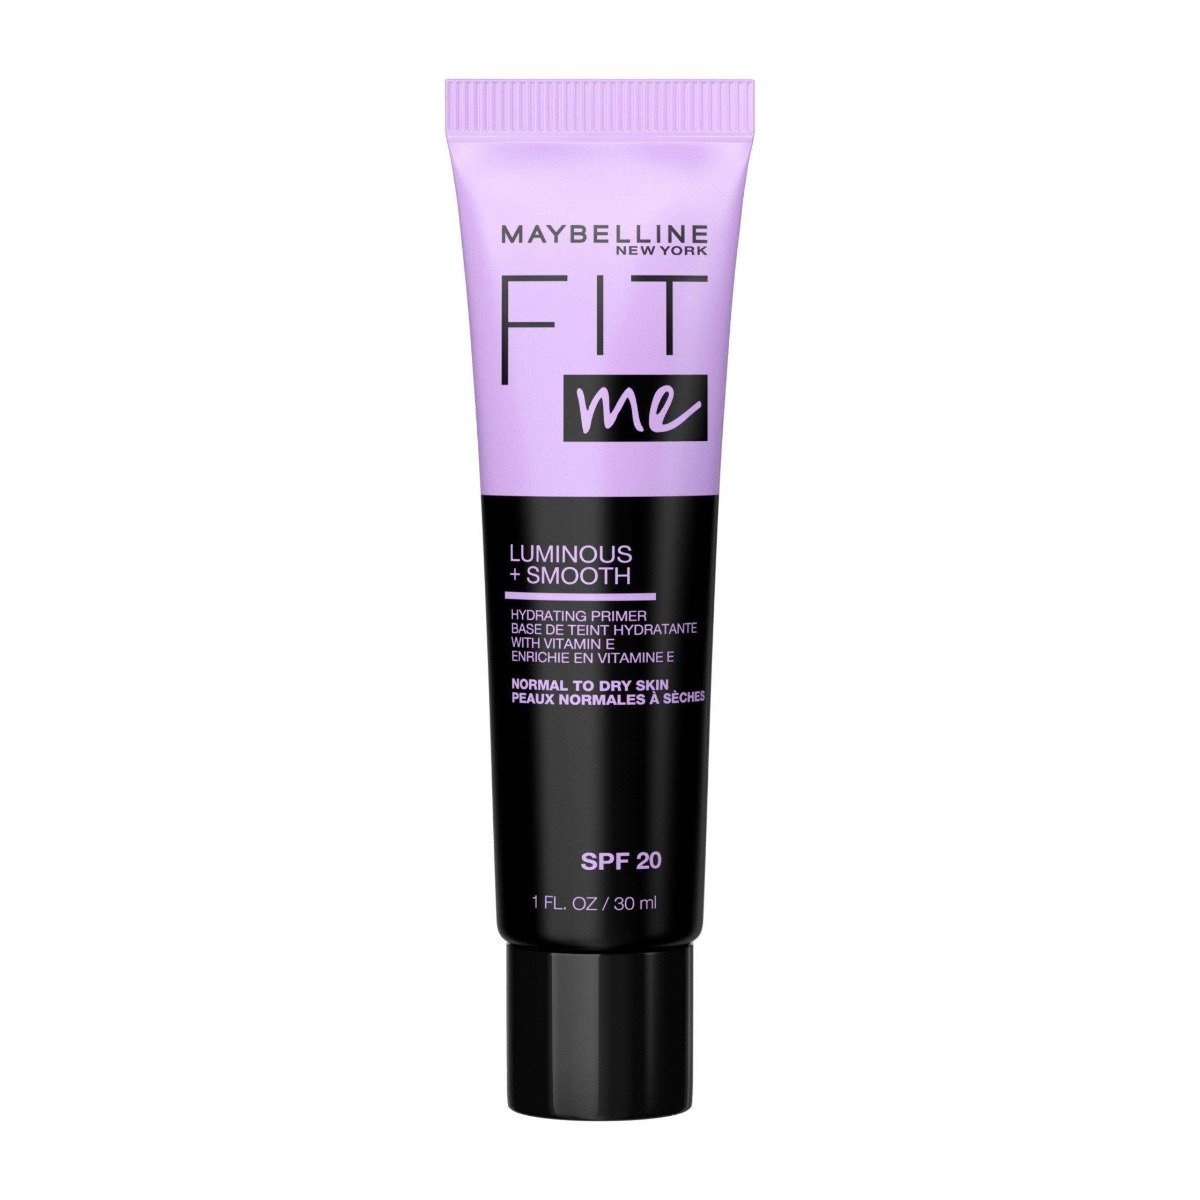 Maybelline Fit Me Luminous+ Smooth Face Primer For Normal to Dry Skin - Bloom Pharmacy